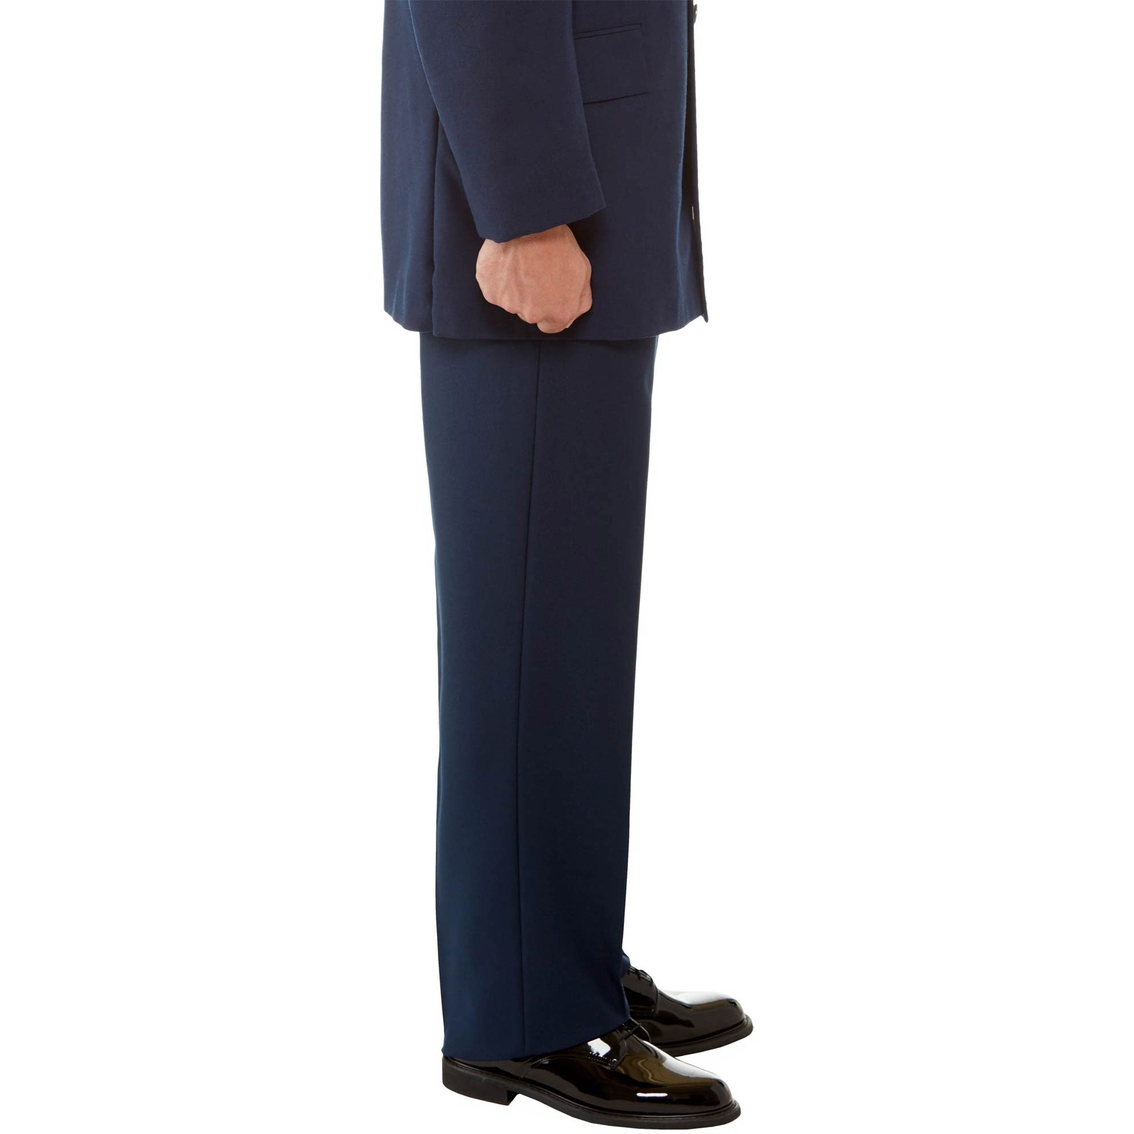 DLATS Air Force / Space Force Service Dress Trousers Male - Image 3 of 4